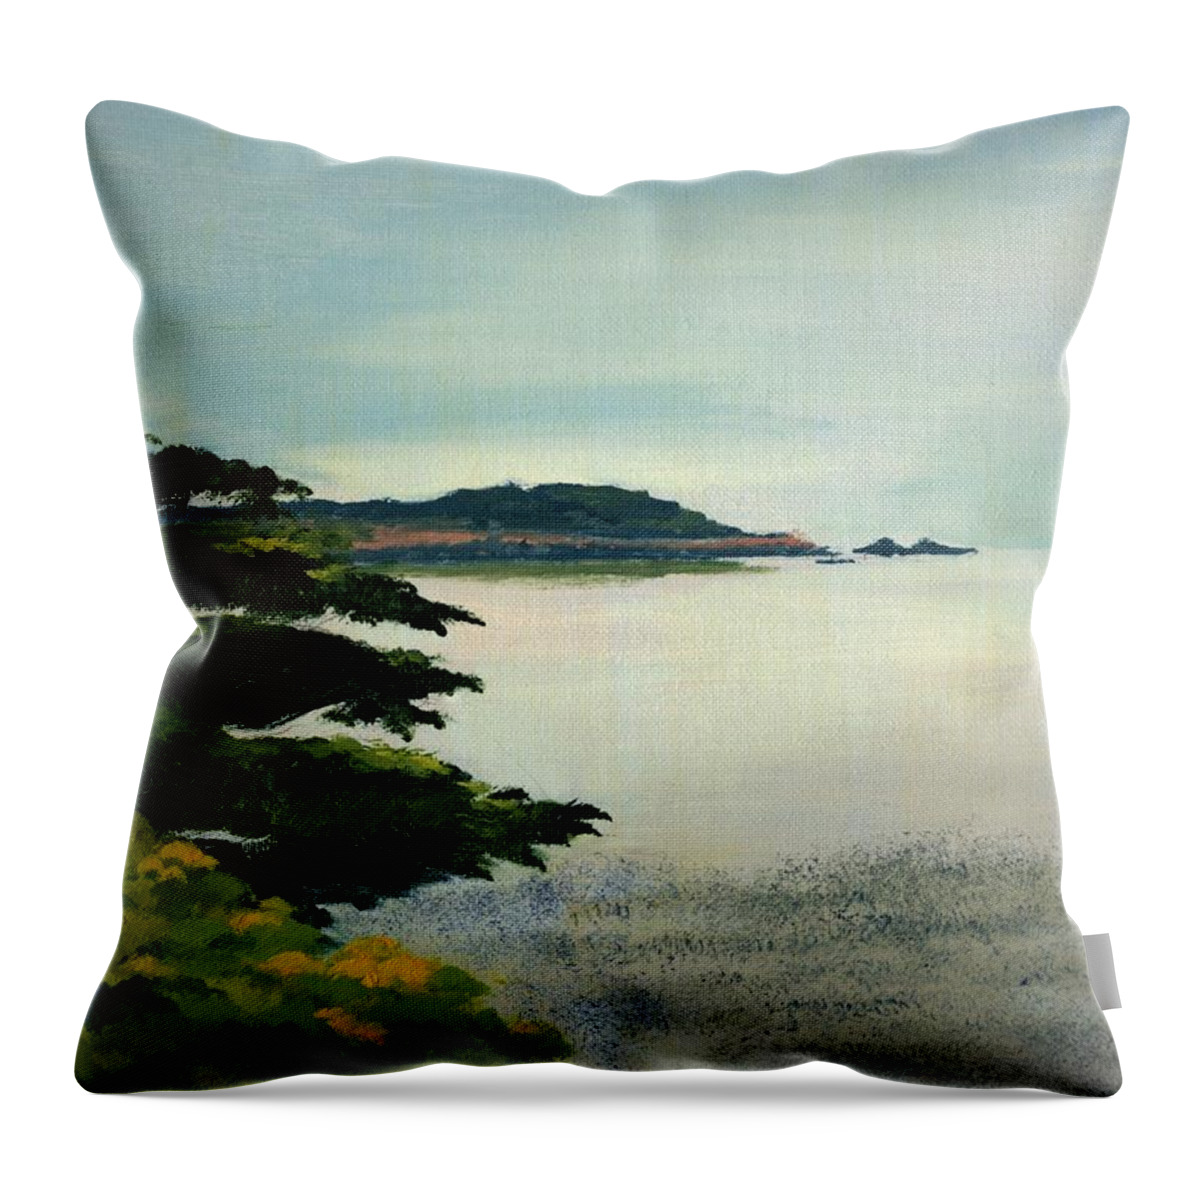 Mendocino Throw Pillow featuring the painting Mendocino Coast Serenity by Arthur Stauder